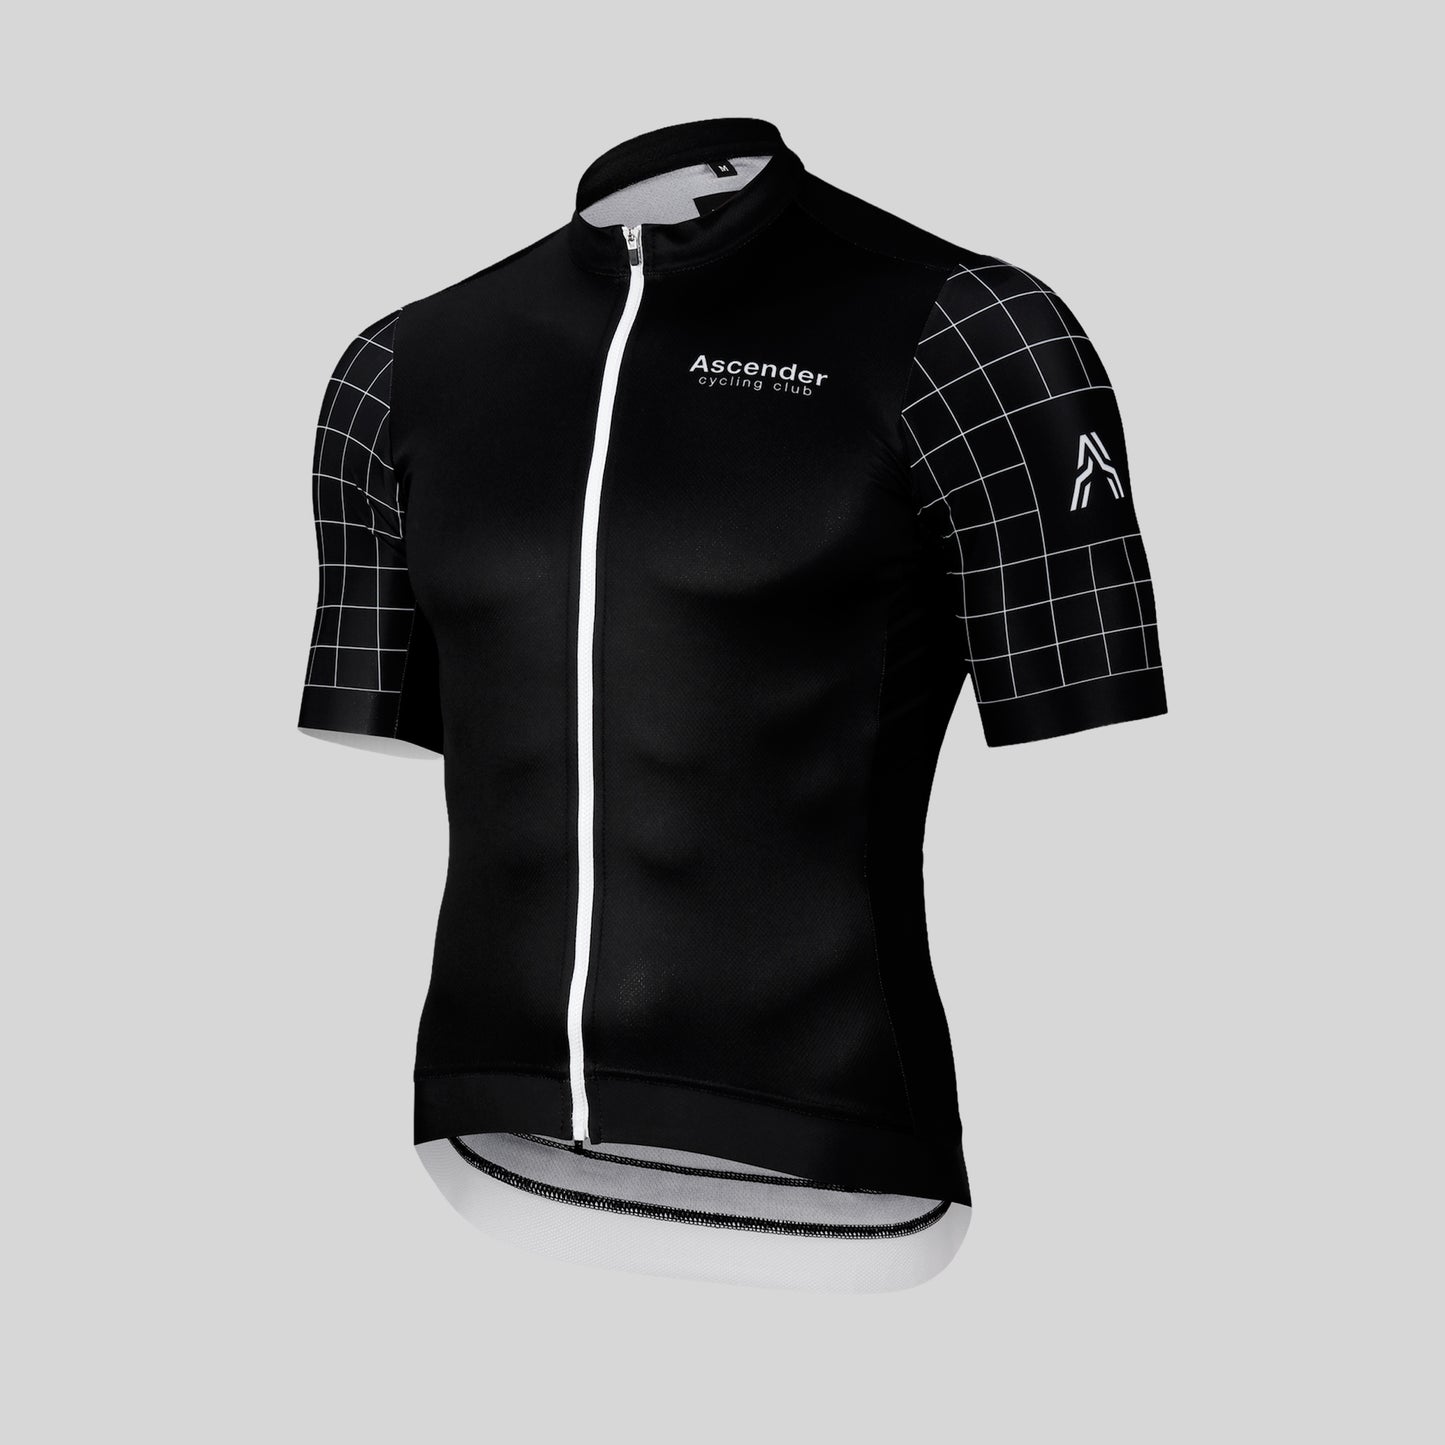 Supernova Sustainable Short Sleeves Cycling Jersey Black from Ascender Cycling Club Zürich Switzerland Front Sided View